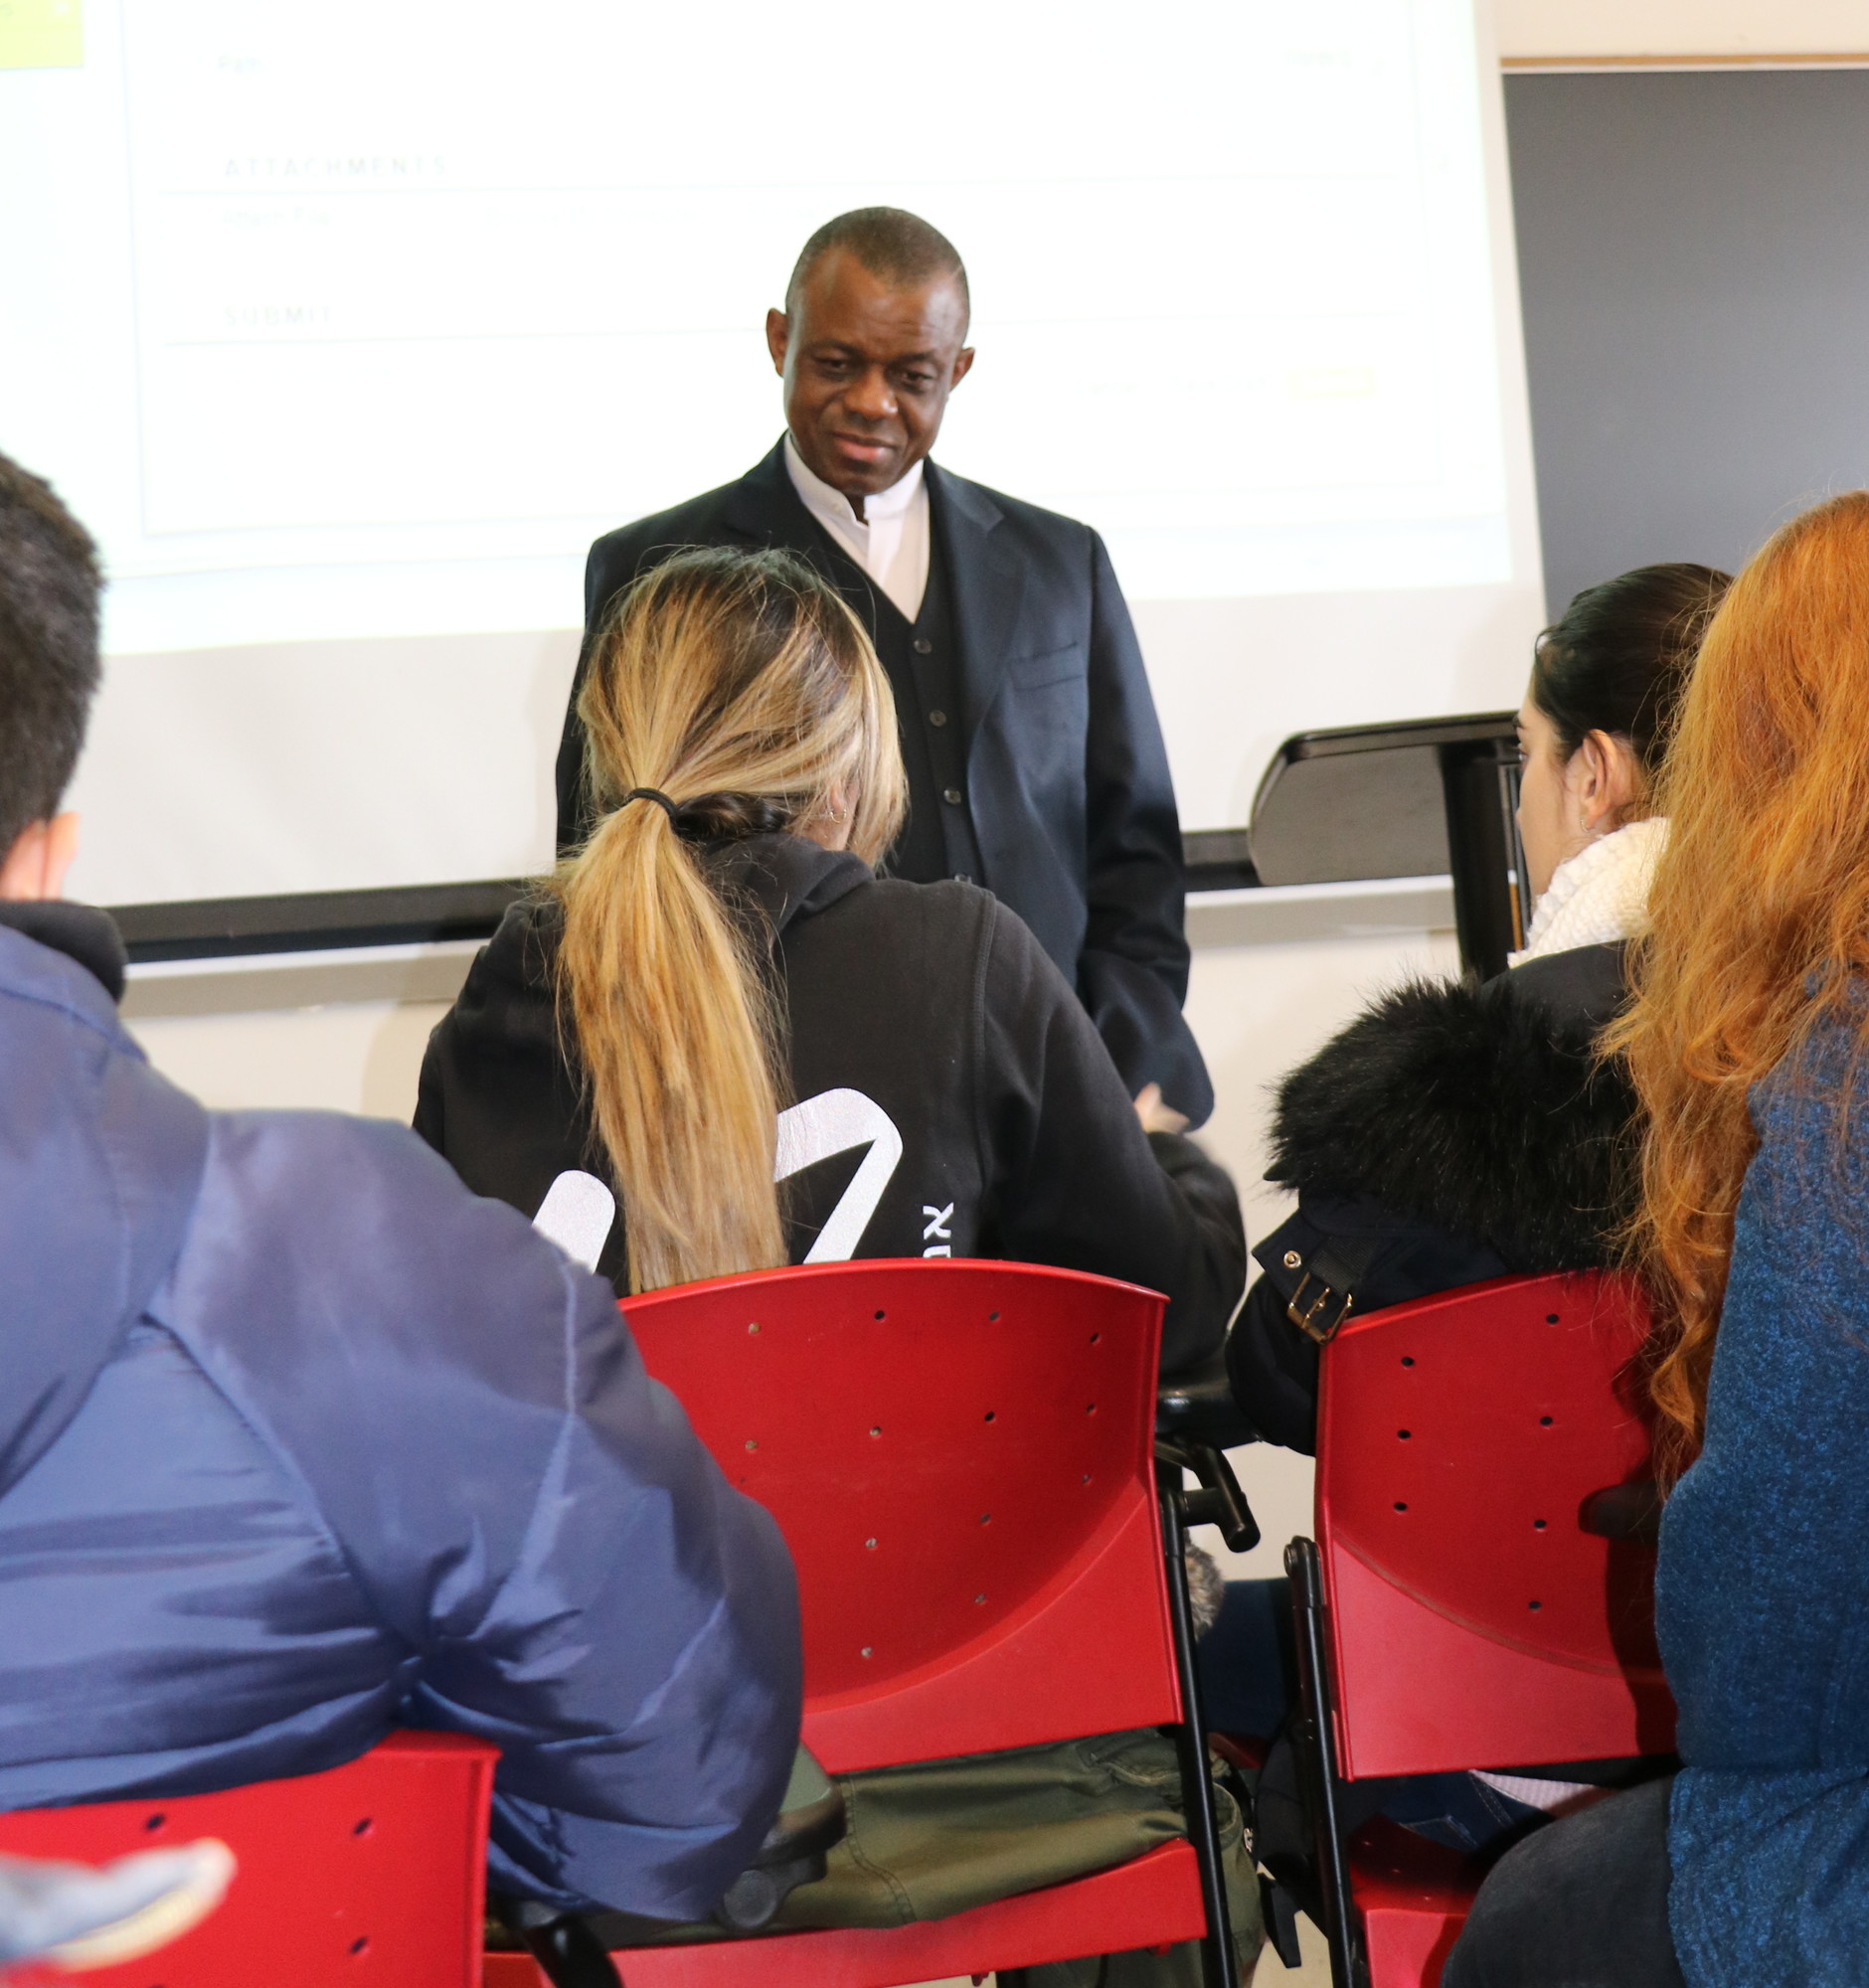 The Rev. Chux Okochi answered questions from his pharmacy students at St. John’s University last week. Okochi has been teaching at the university since 2003.